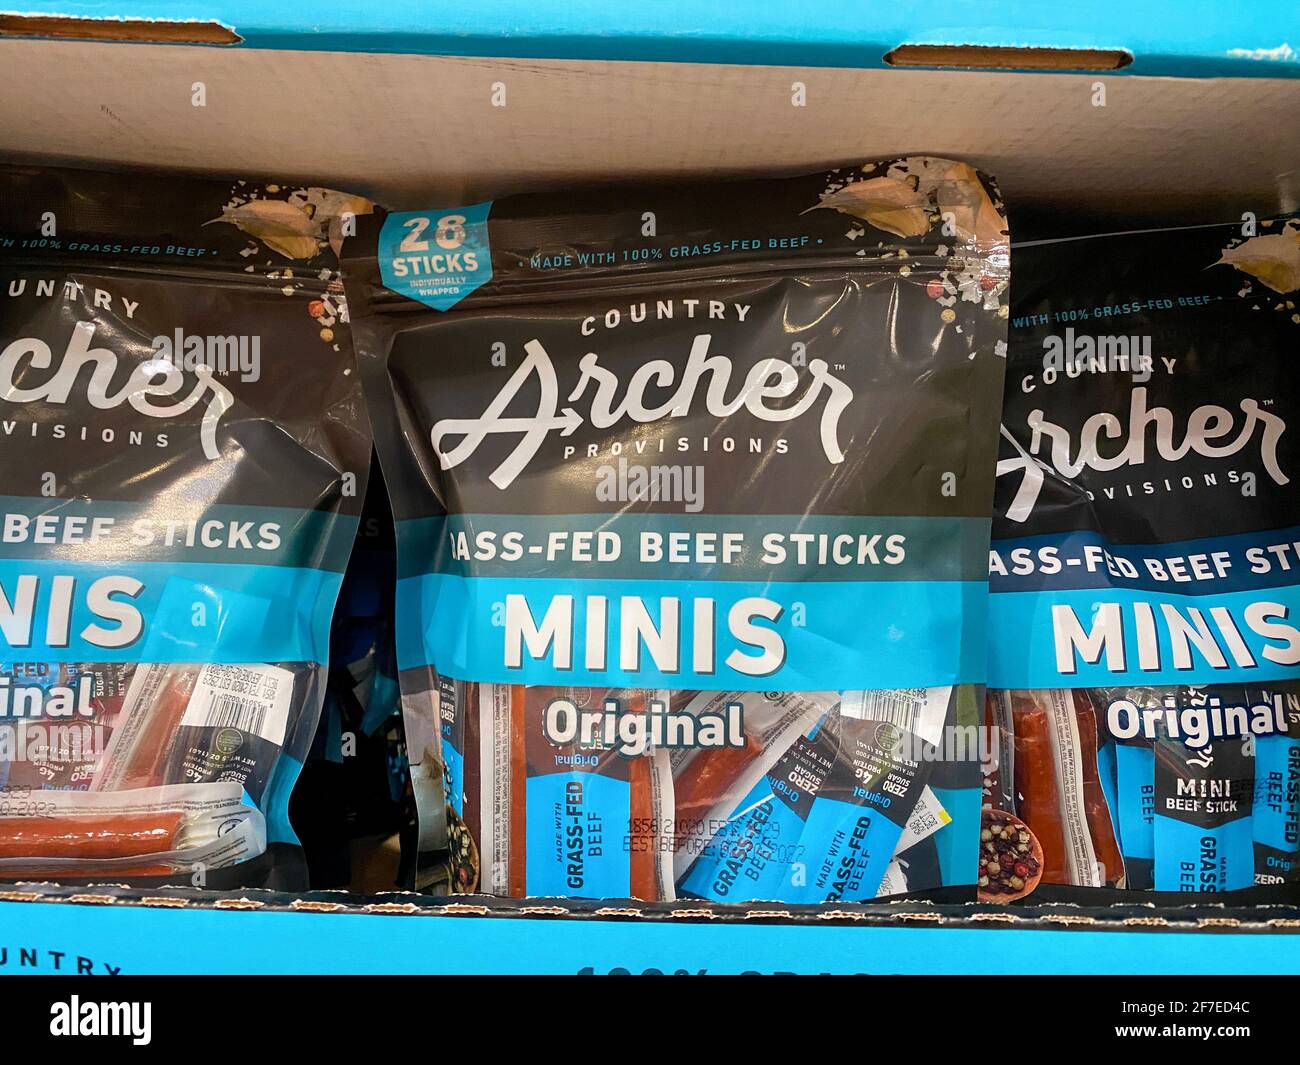 Country Archer Provisions Grass fed beef sticks on a store shelf Stock Photo